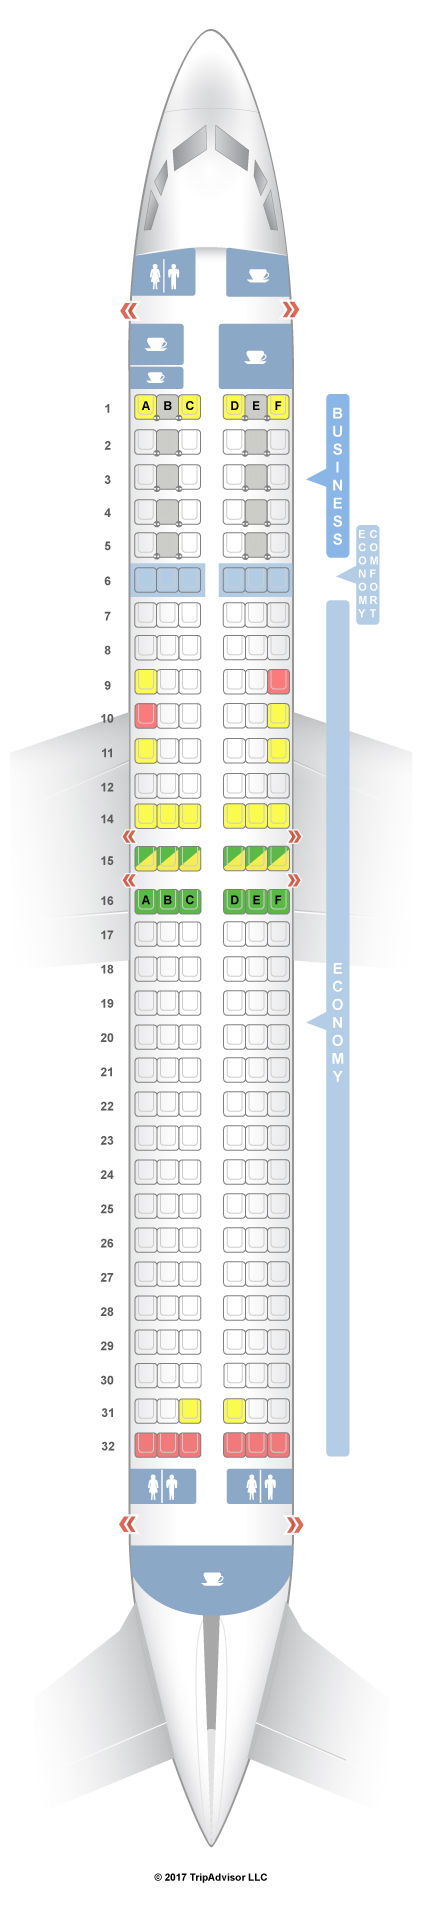 klm seat assignment fee